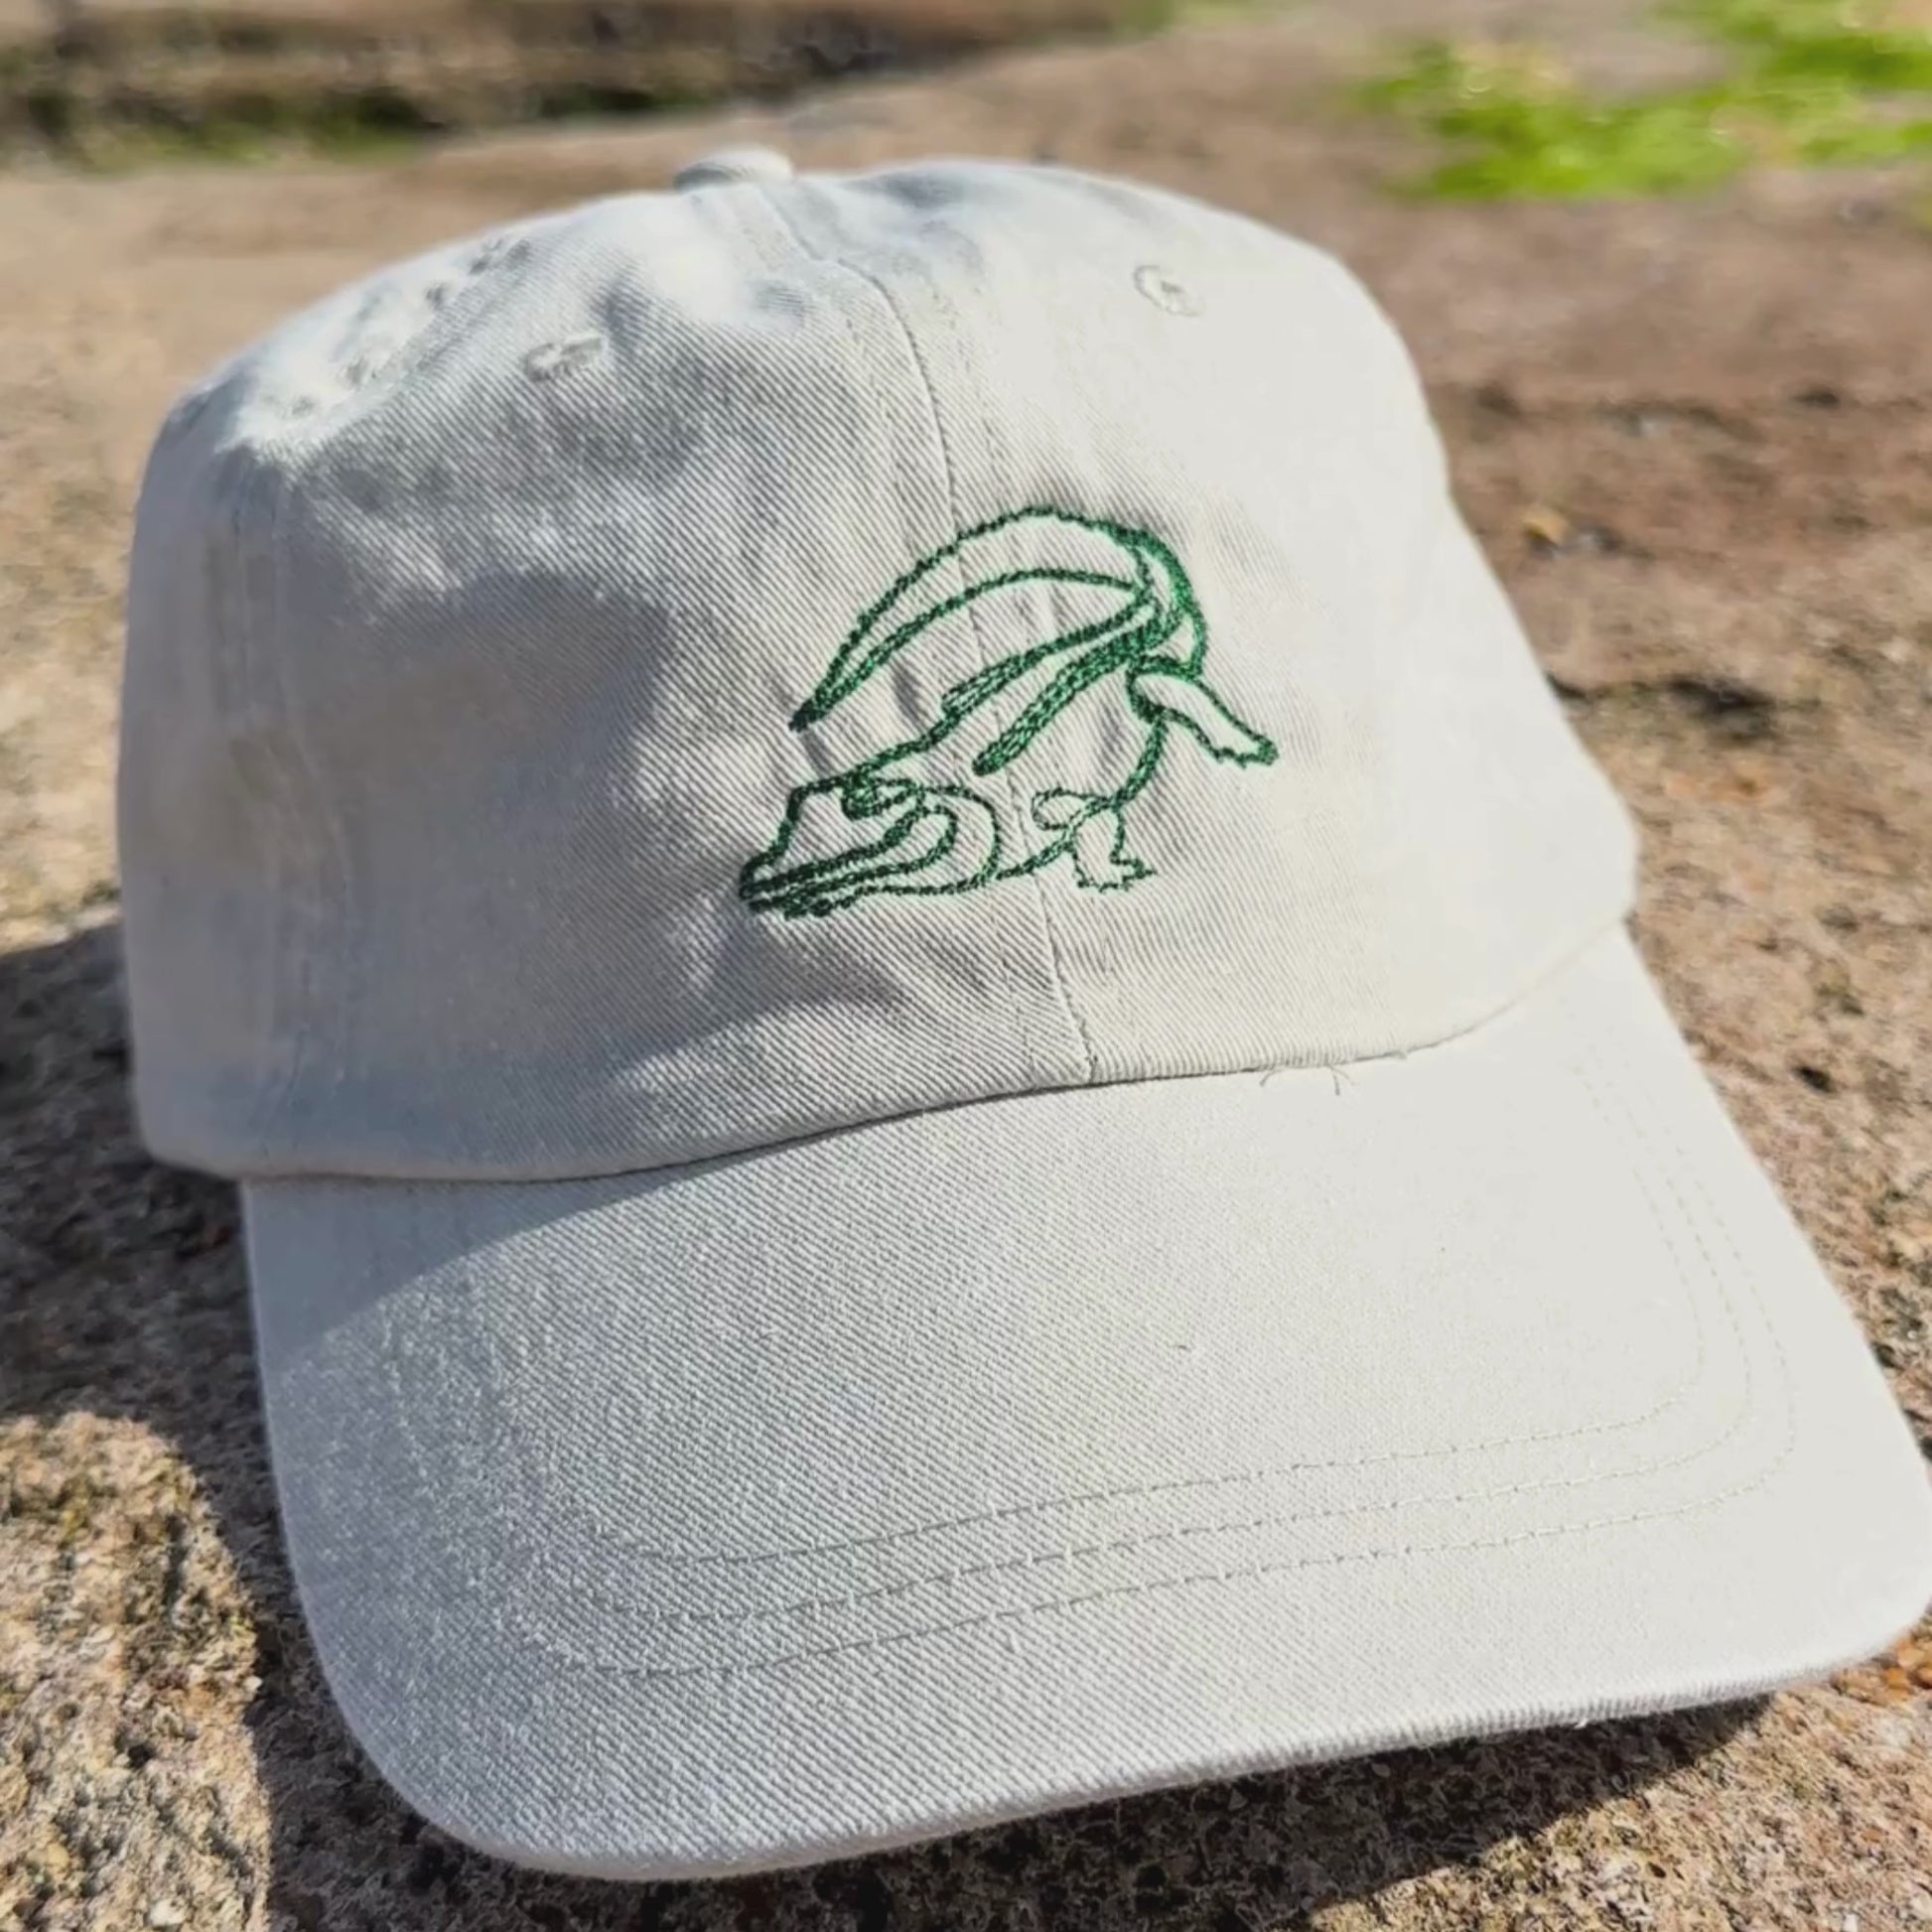 Alligator Embroidered Hat - Connected Clothing Company - 10% donated to ocean conservation